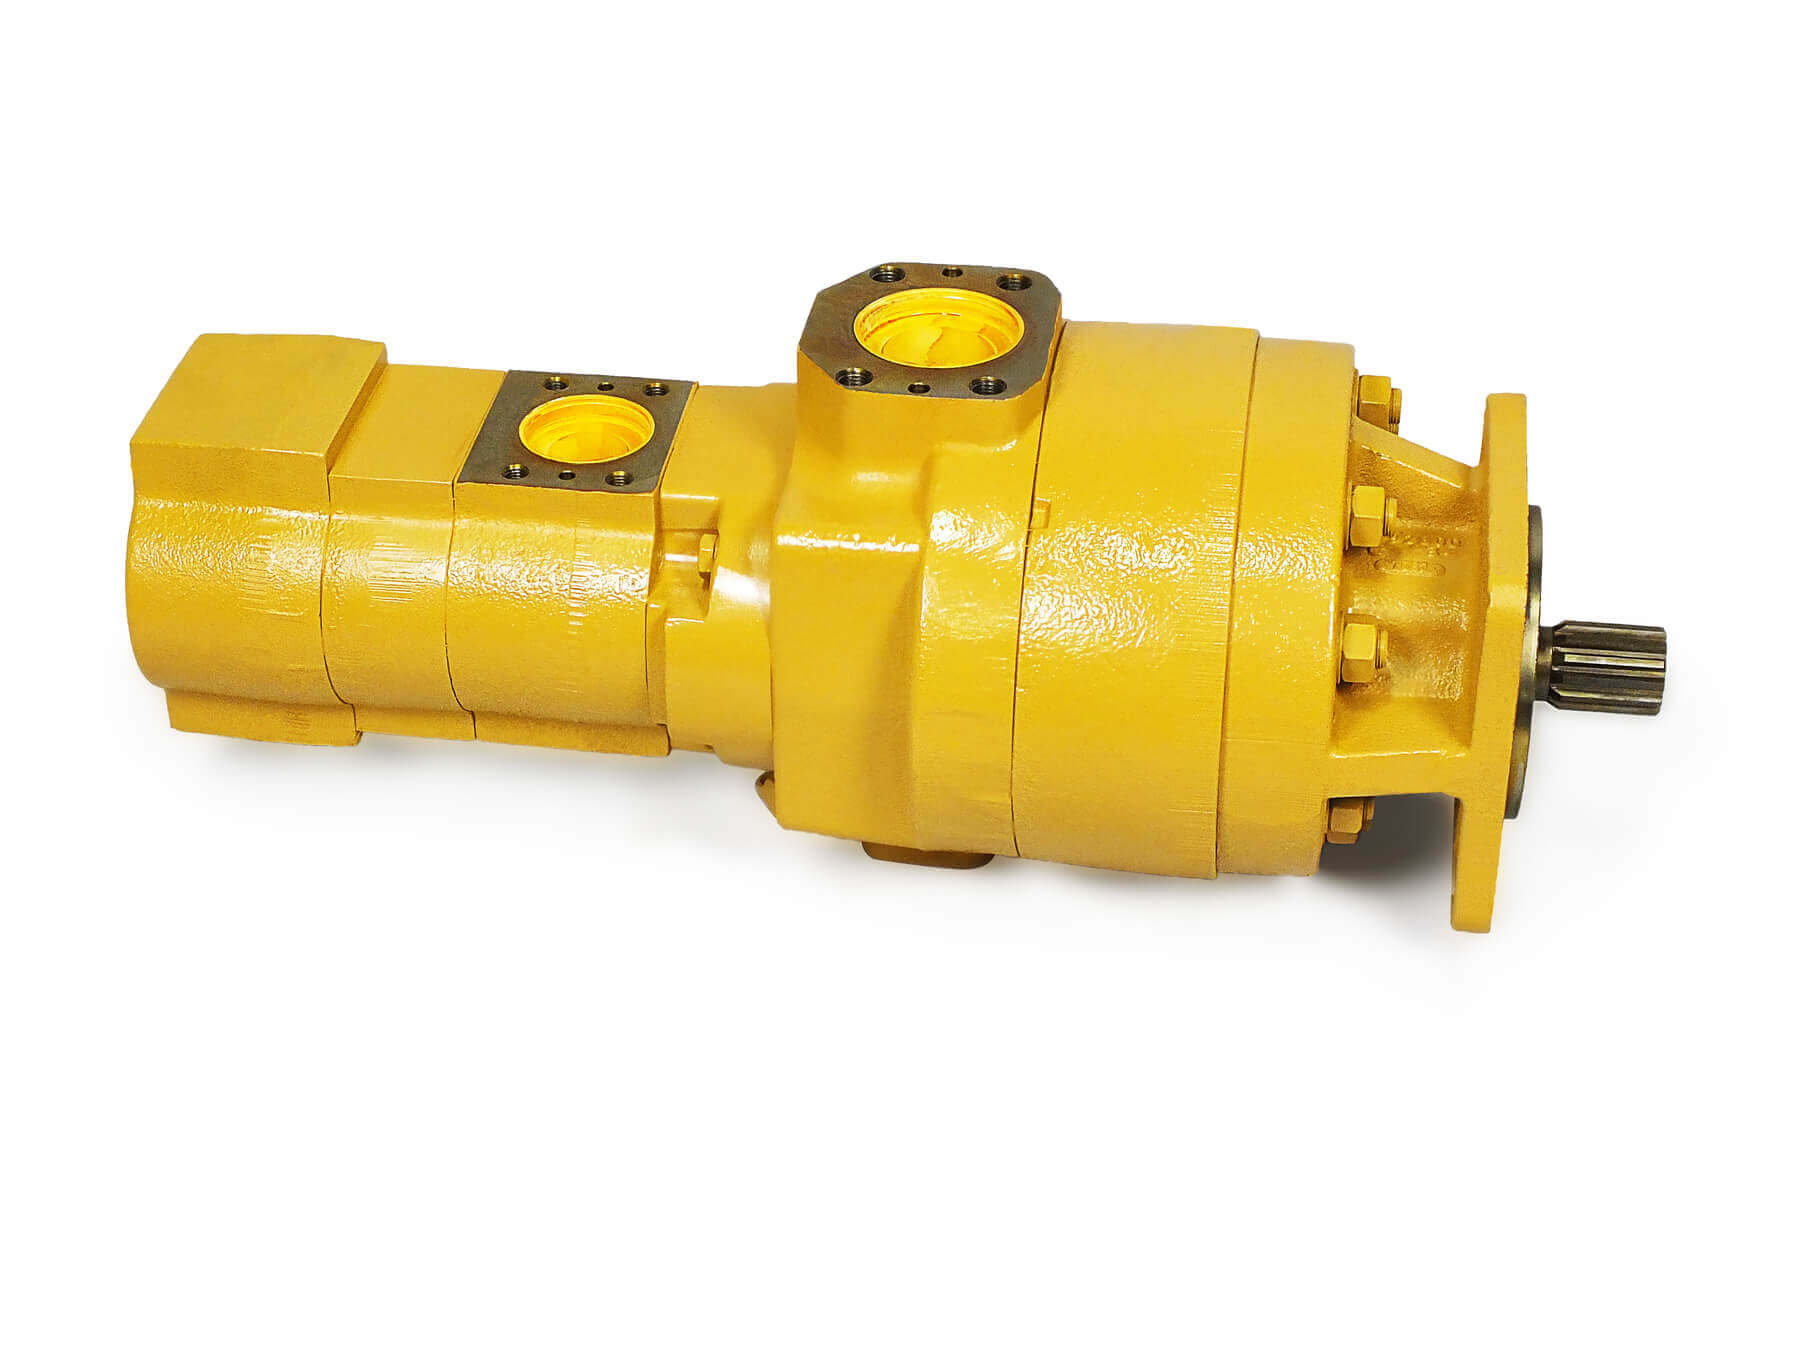 Hydraulic Pumps for Sale USA